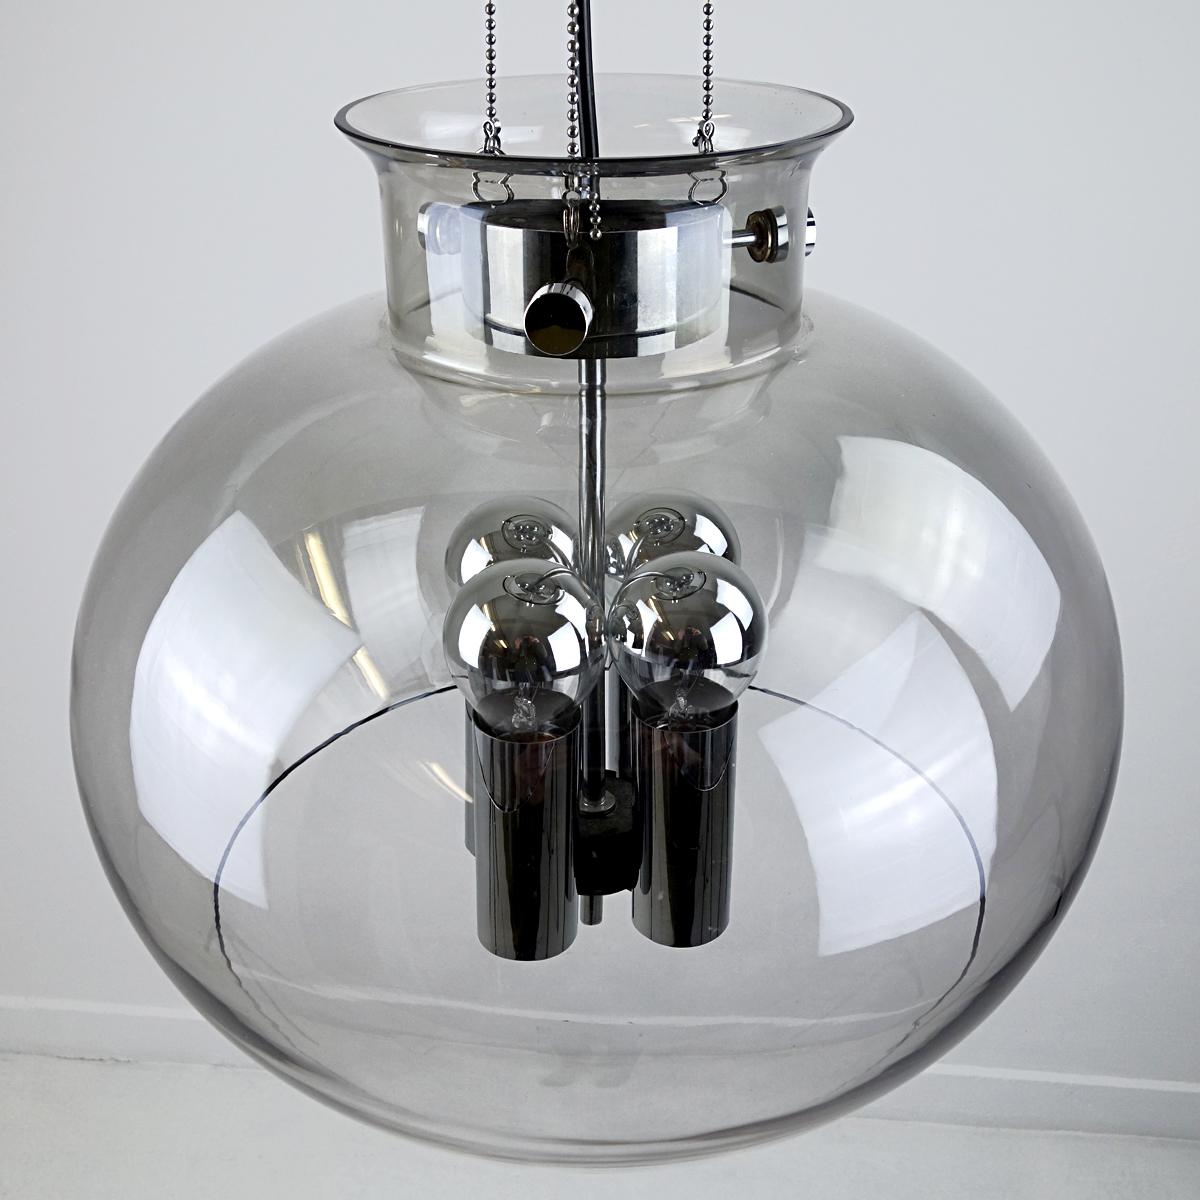 Late 20th Century Large Midcentury Glass Ball Pendant with Chrome Hardware by Glasshütte Limburg For Sale